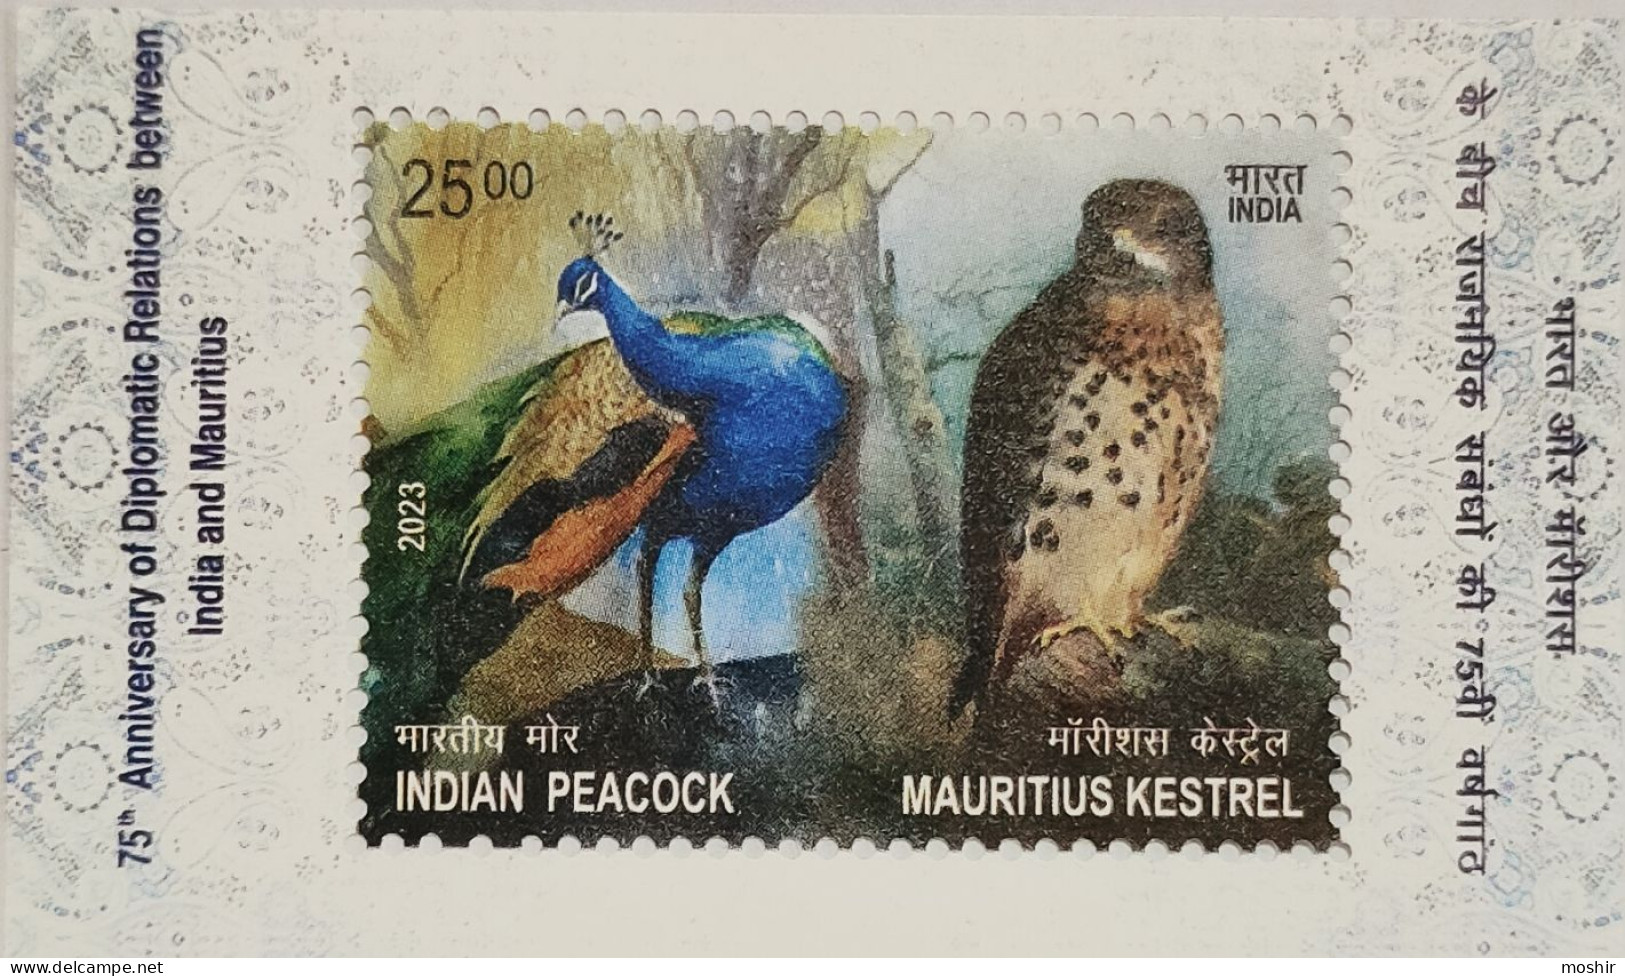 PEACOCK - KESTREL - INDIA-MAURITIUS JOINT ISSUE - Pavoni